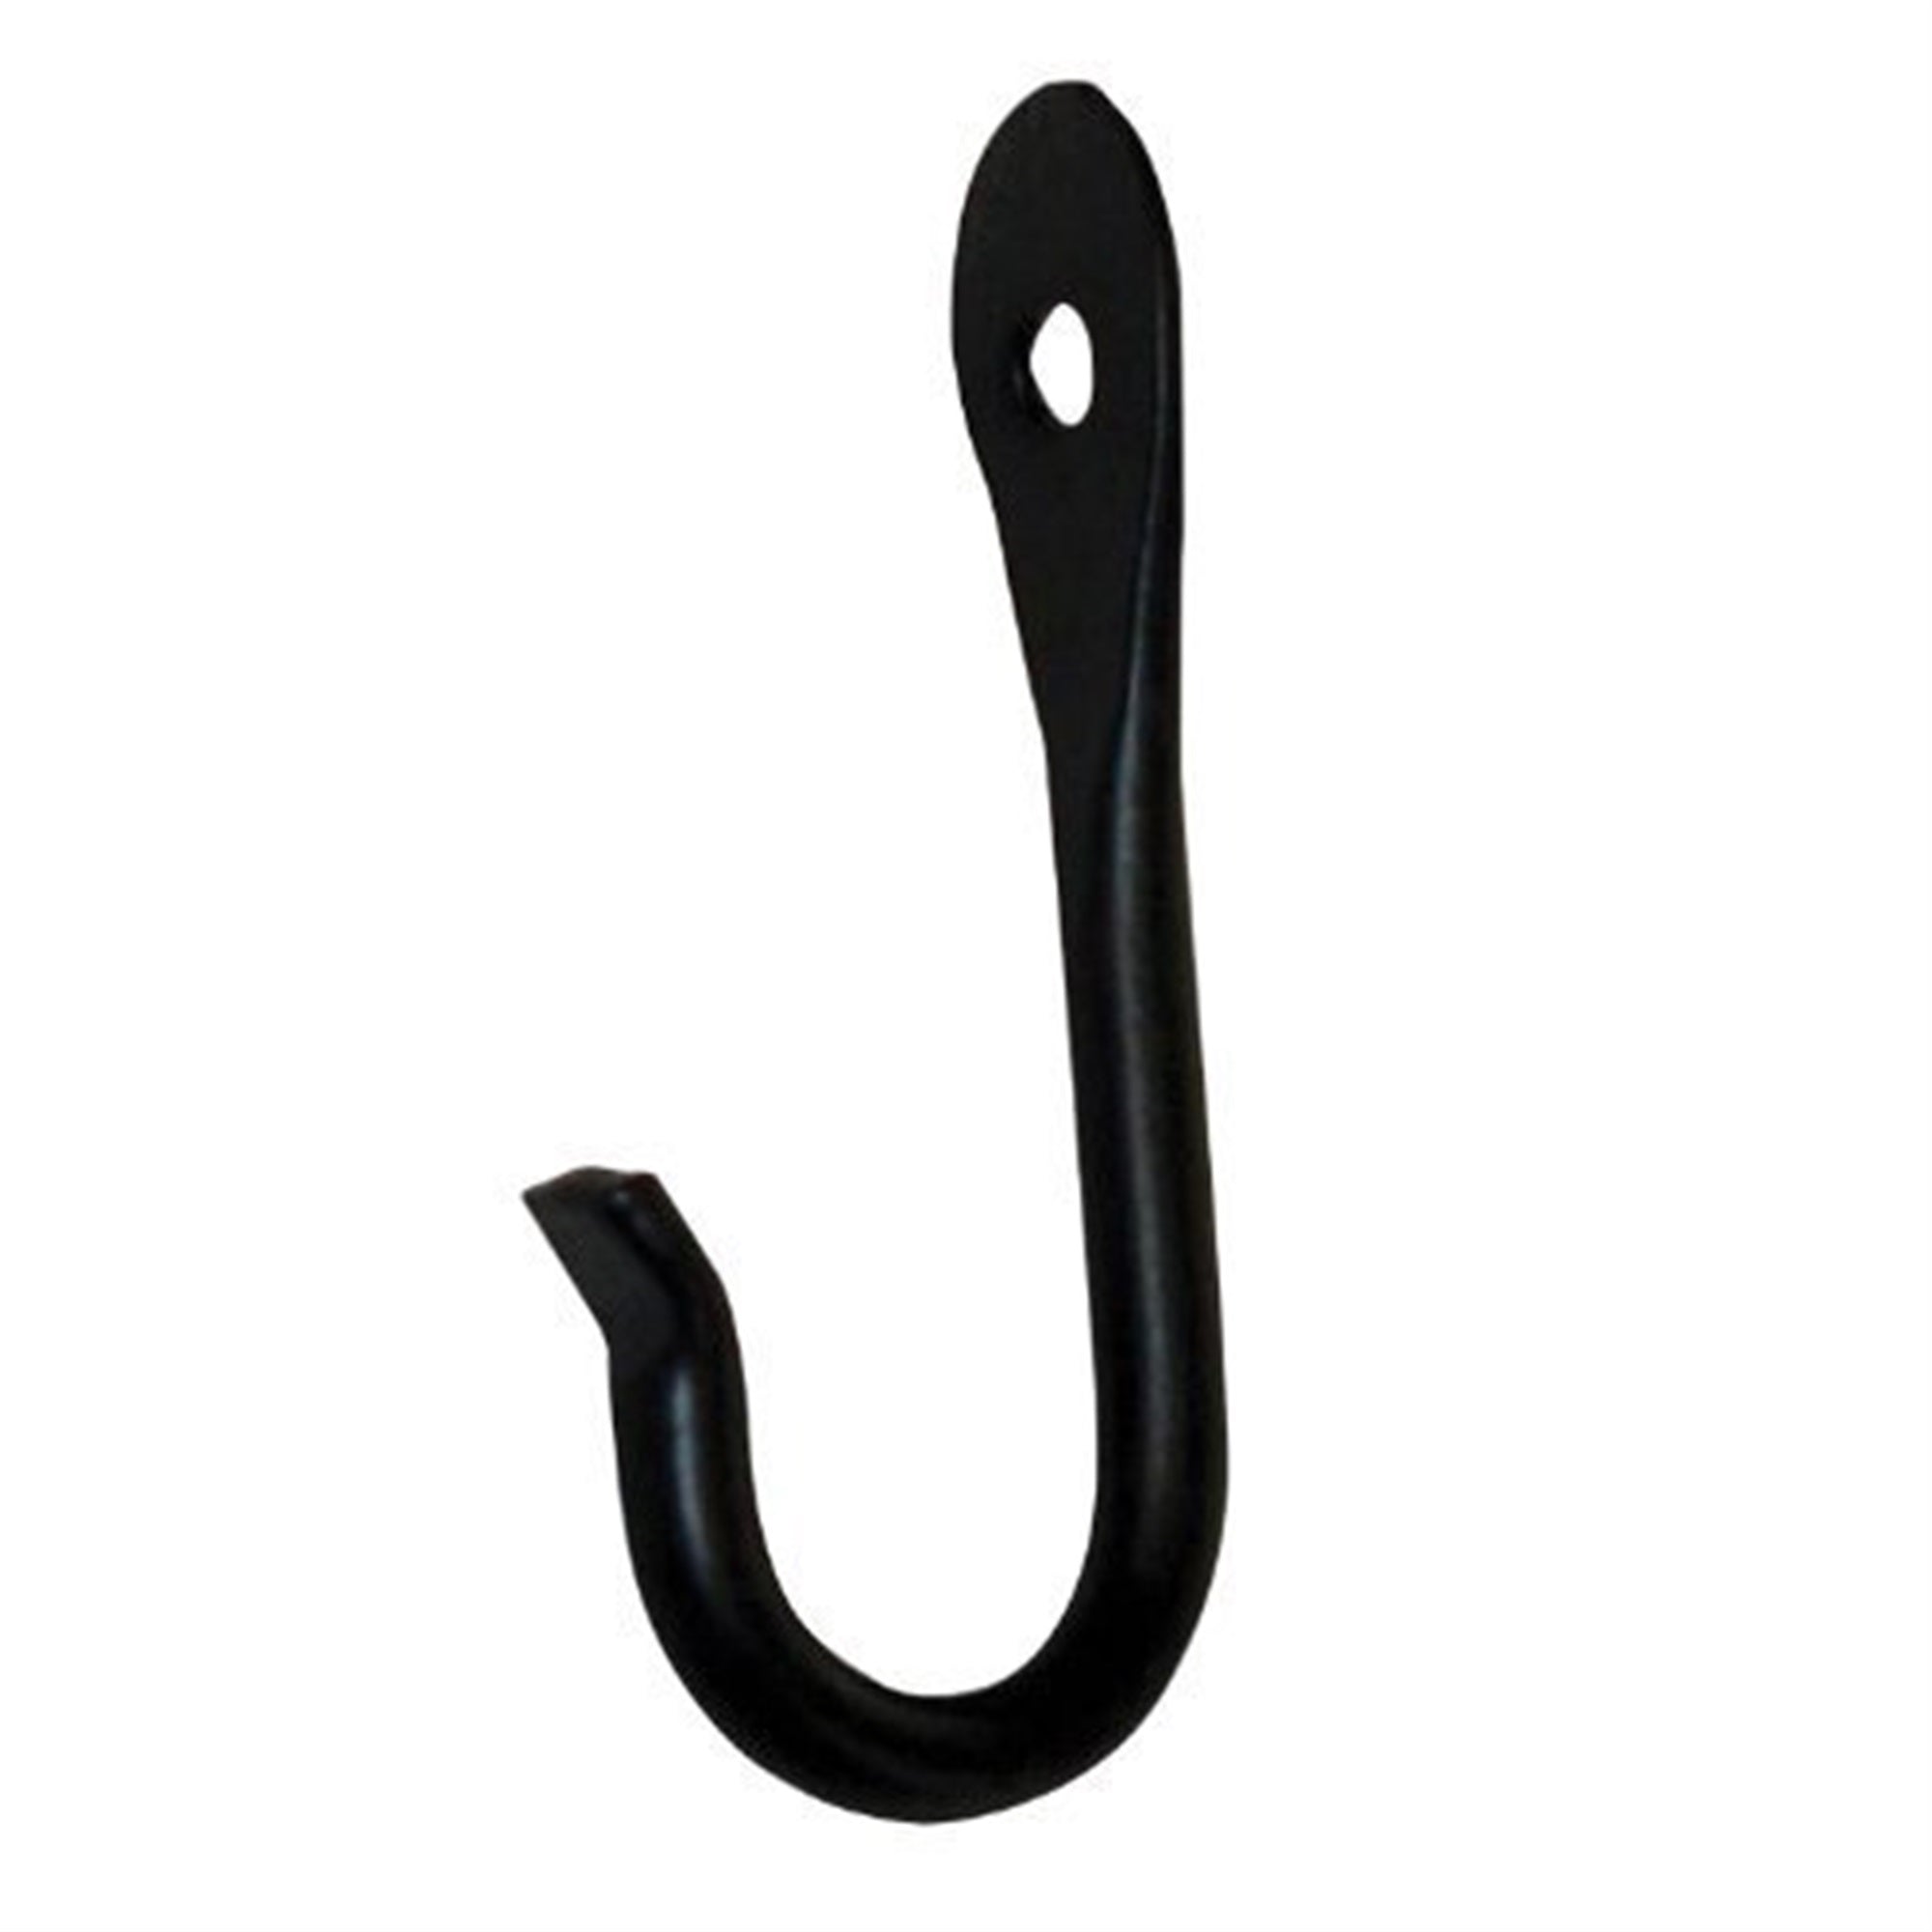 Hookery J Hook Hanger with Flared End for Bird Feeders, Holds 25 lb, 3"